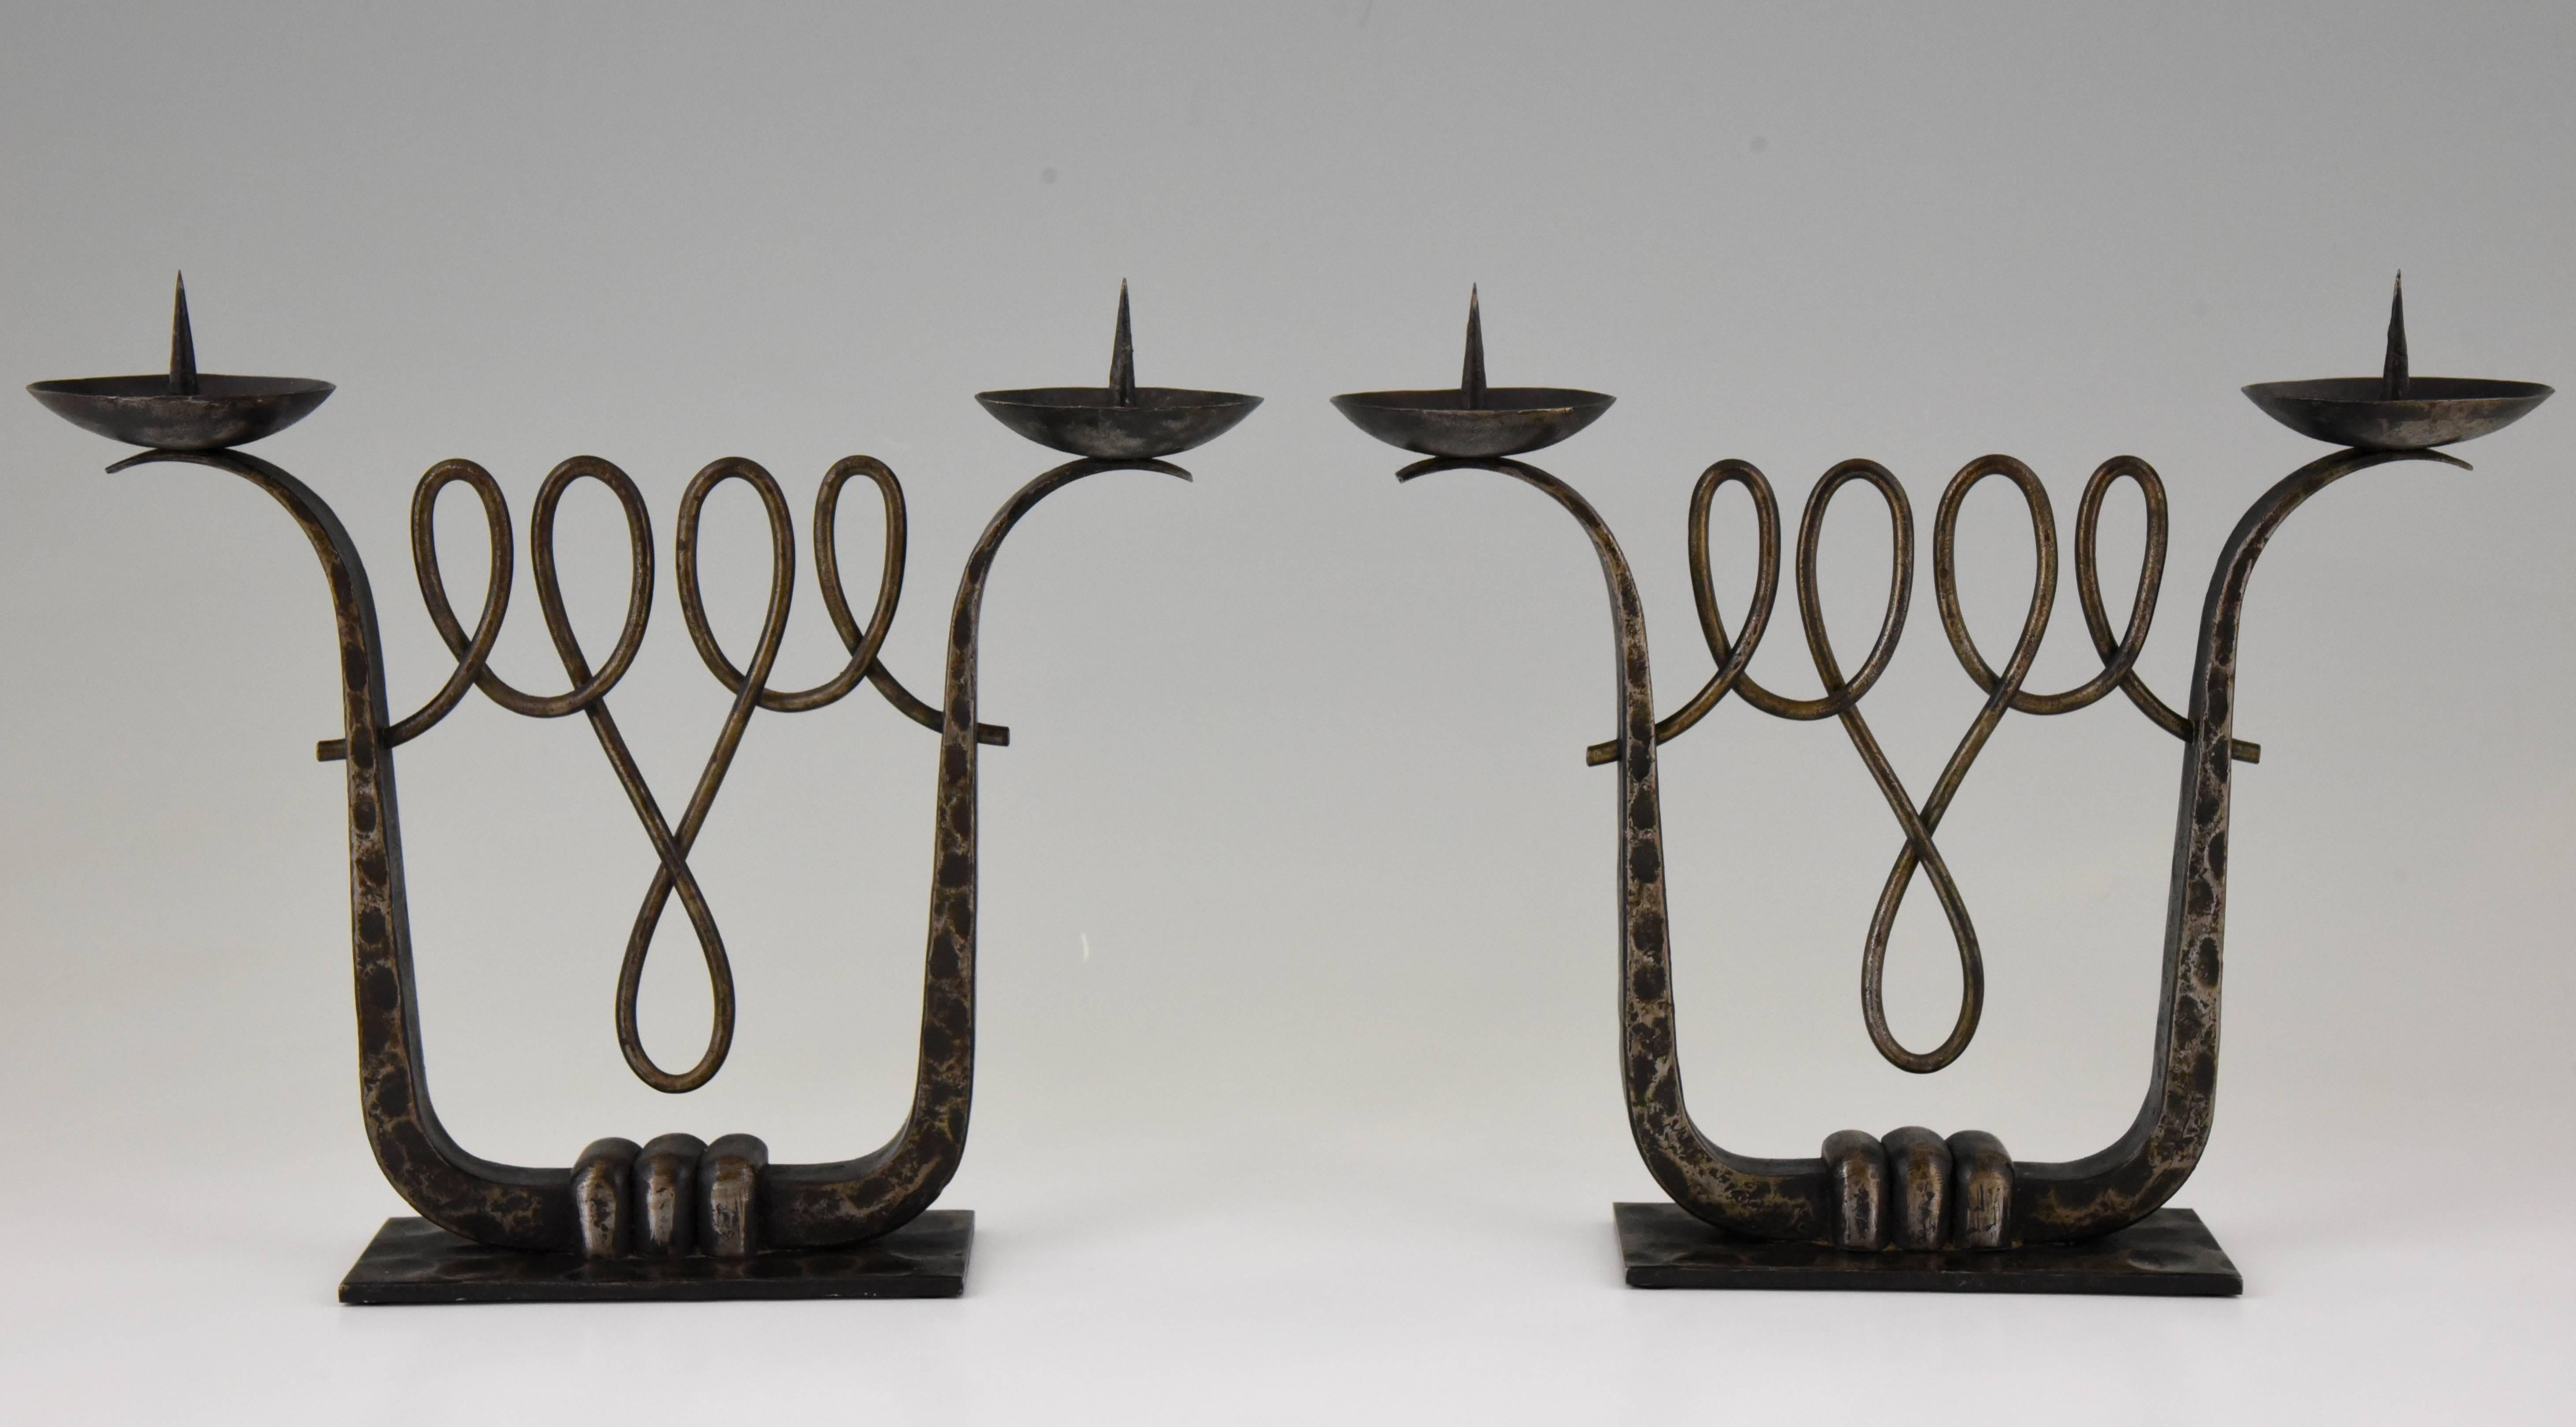 French Fine Pair of Art Deco Wrought Iron Candelabra by Zadounaïsky 1930 France